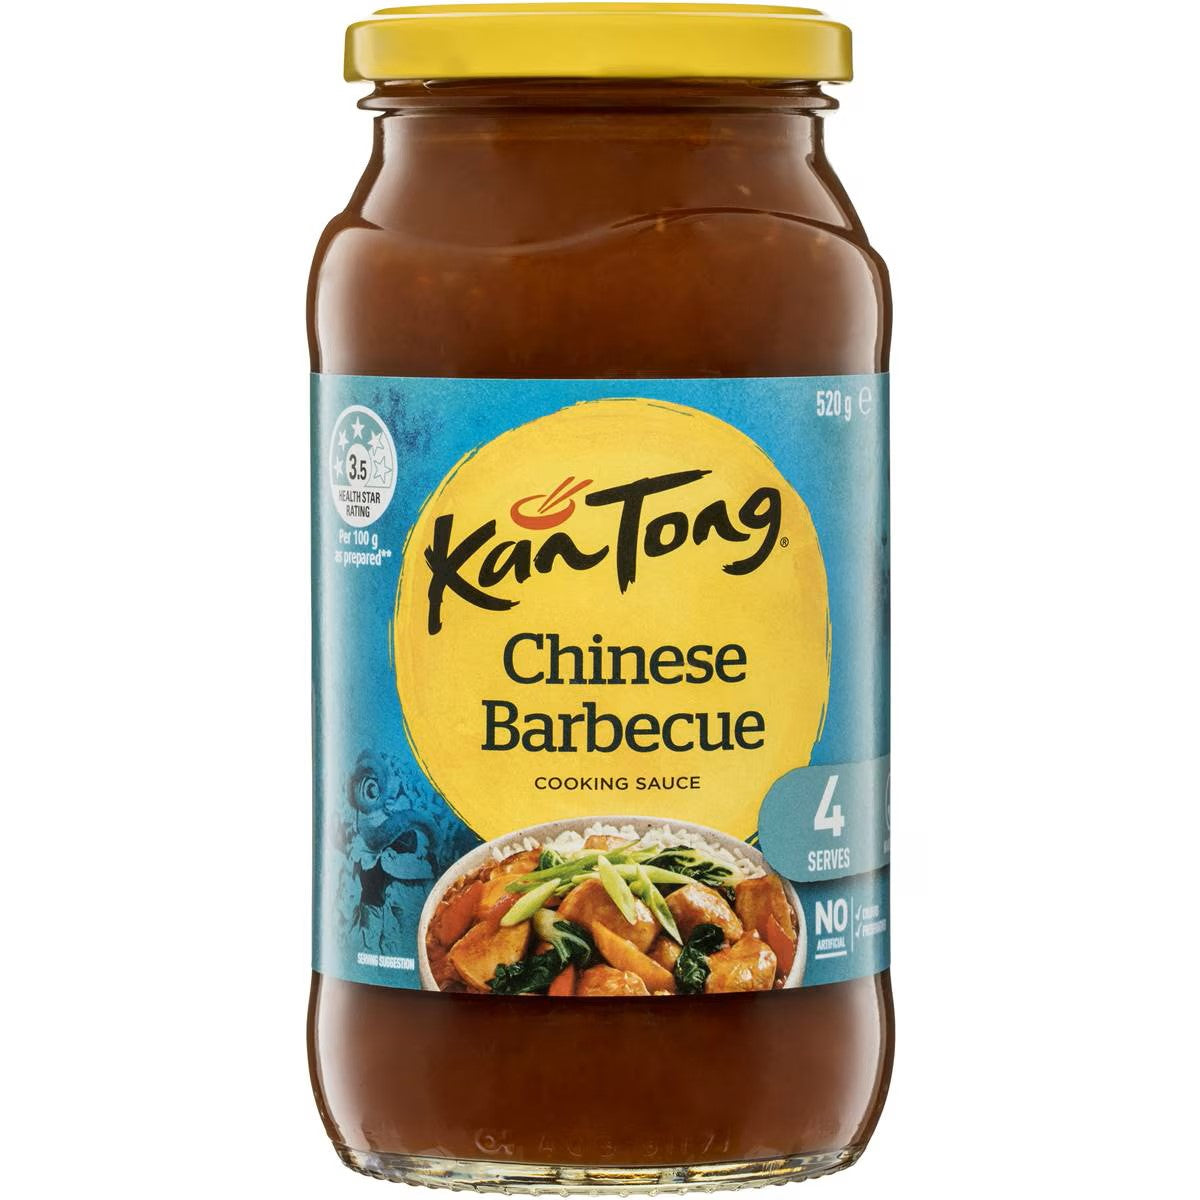 KanTong Chinese Barbecue Cooking Sauce 520g